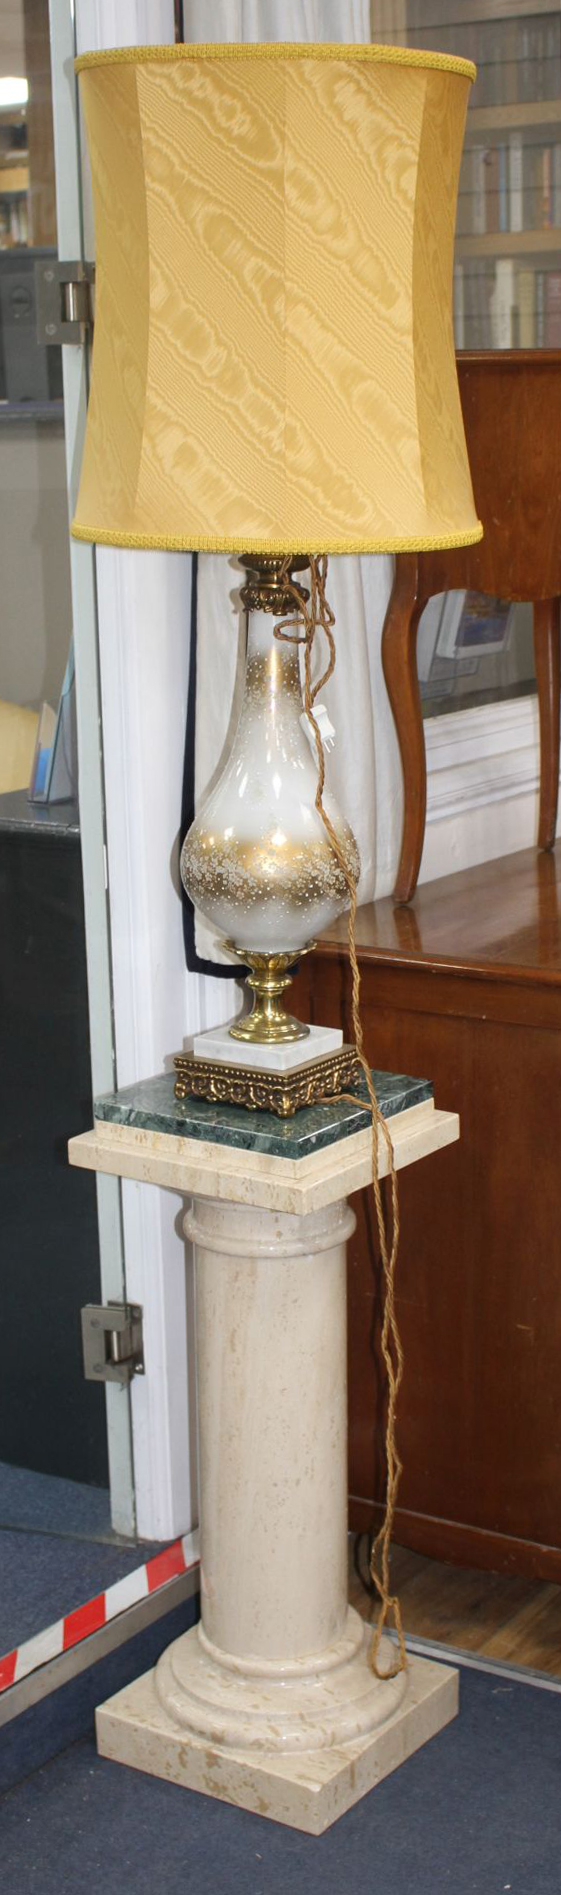 Pair of Venetian Style Brass Mounted Jewelled Glass Table Lamps on Pedestals - Image 2 of 3